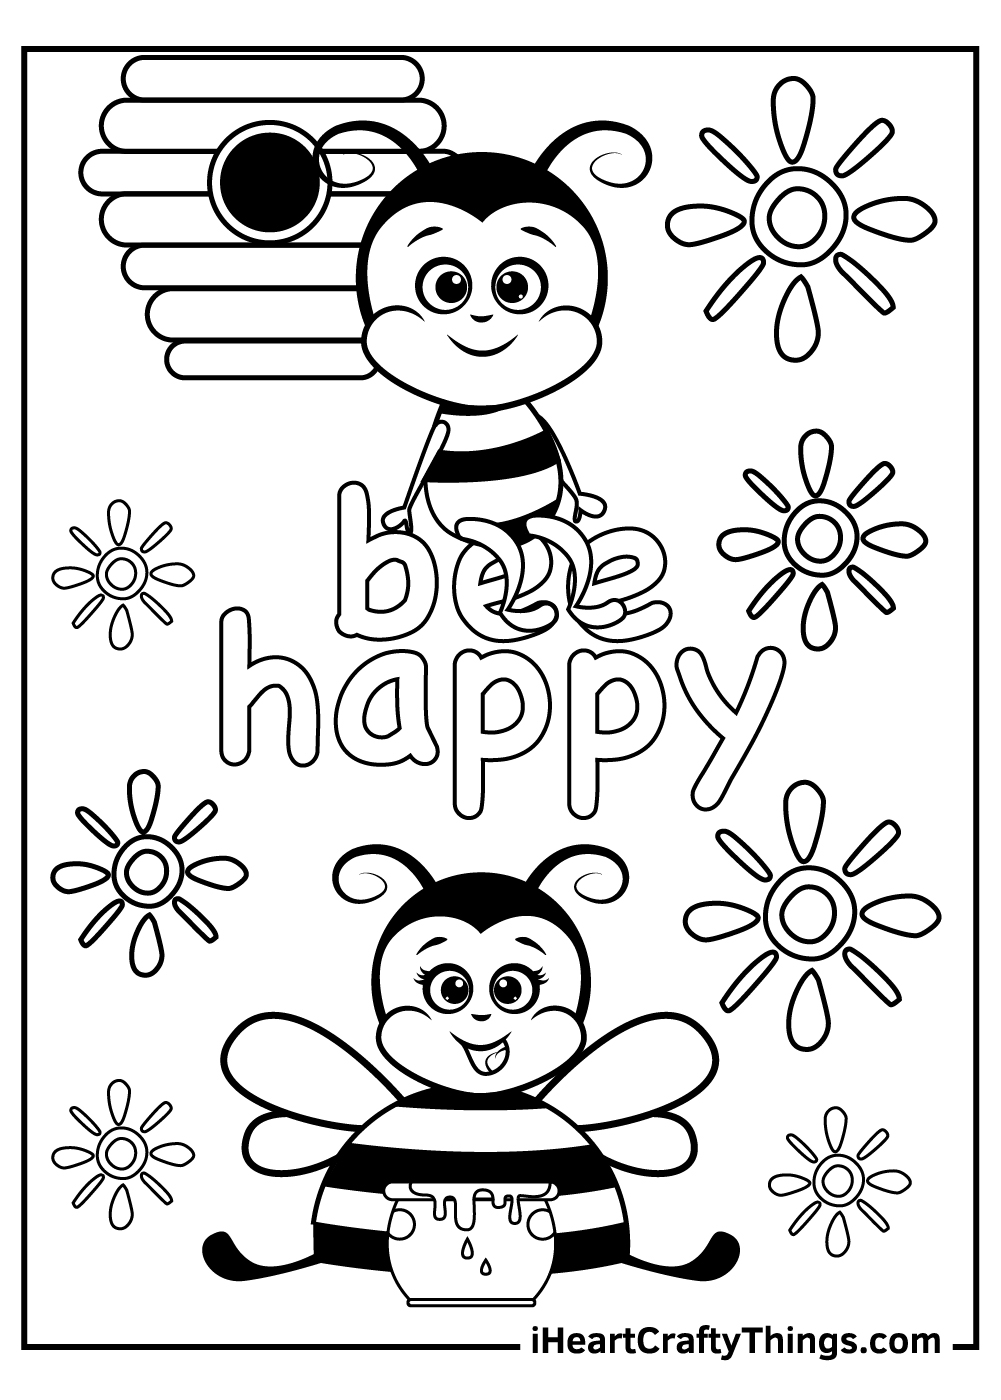 Printable Bee Coloring Pages